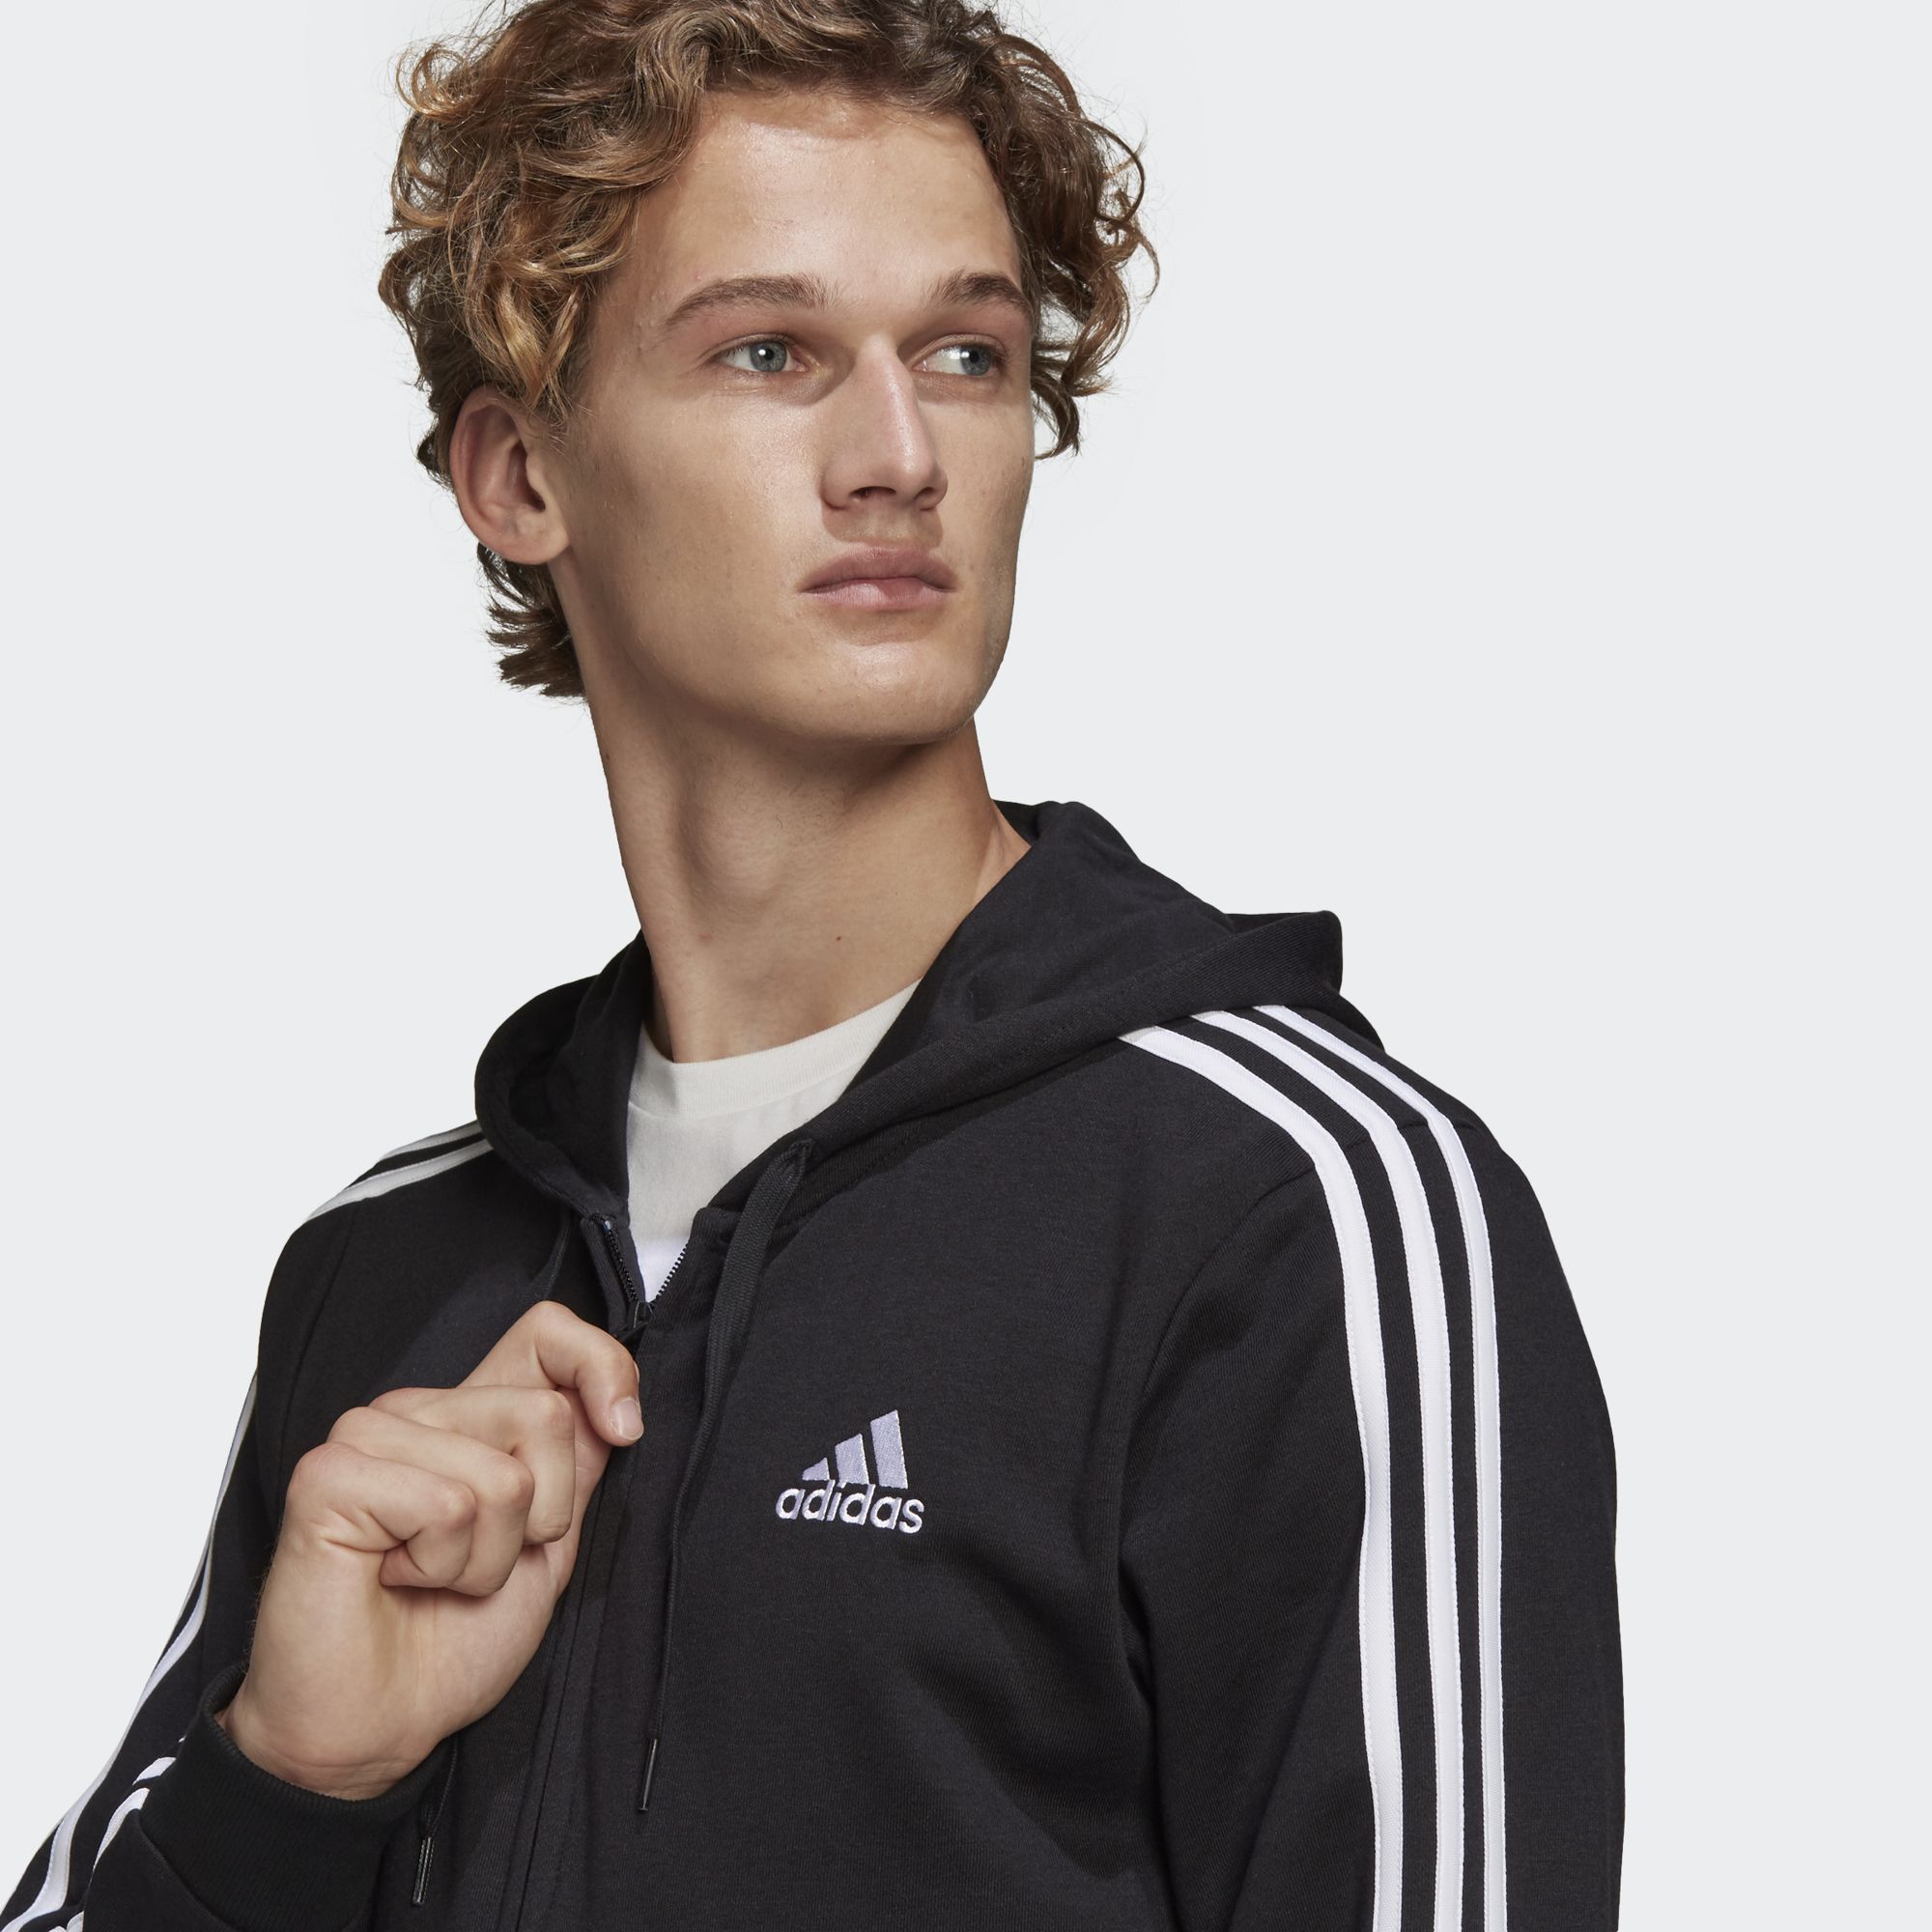 adidas NOT SPORTS SPECIFIC Essentials French Terry 3-Stripes Full-Zip Hoodie ผู้ชาย สีดำ GK9032